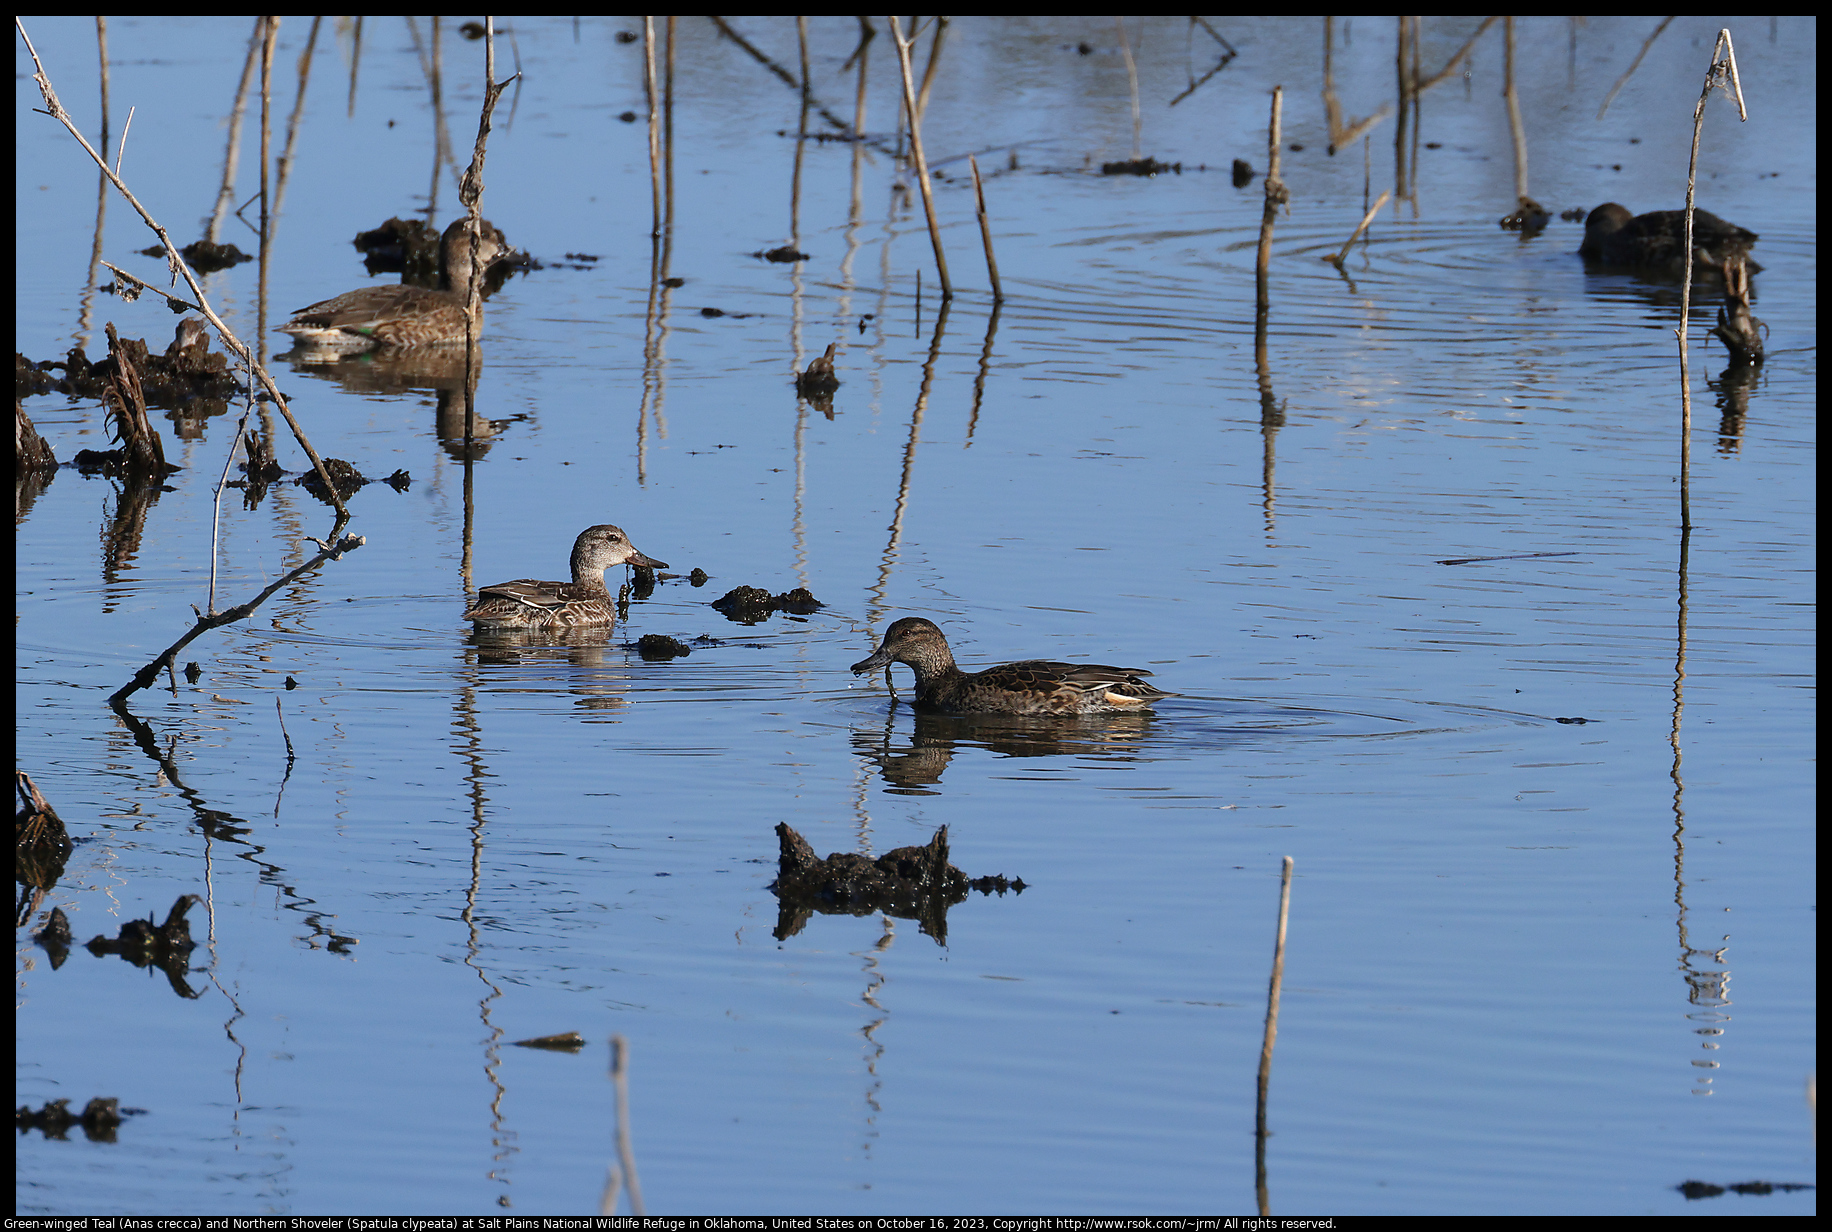 Green-winged Teal (Anas crecca) and Northern Shoveler (Spatula clypeata) at Salt Plains National Wildlife Refuge in Oklahoma, United States on October 16, 2023